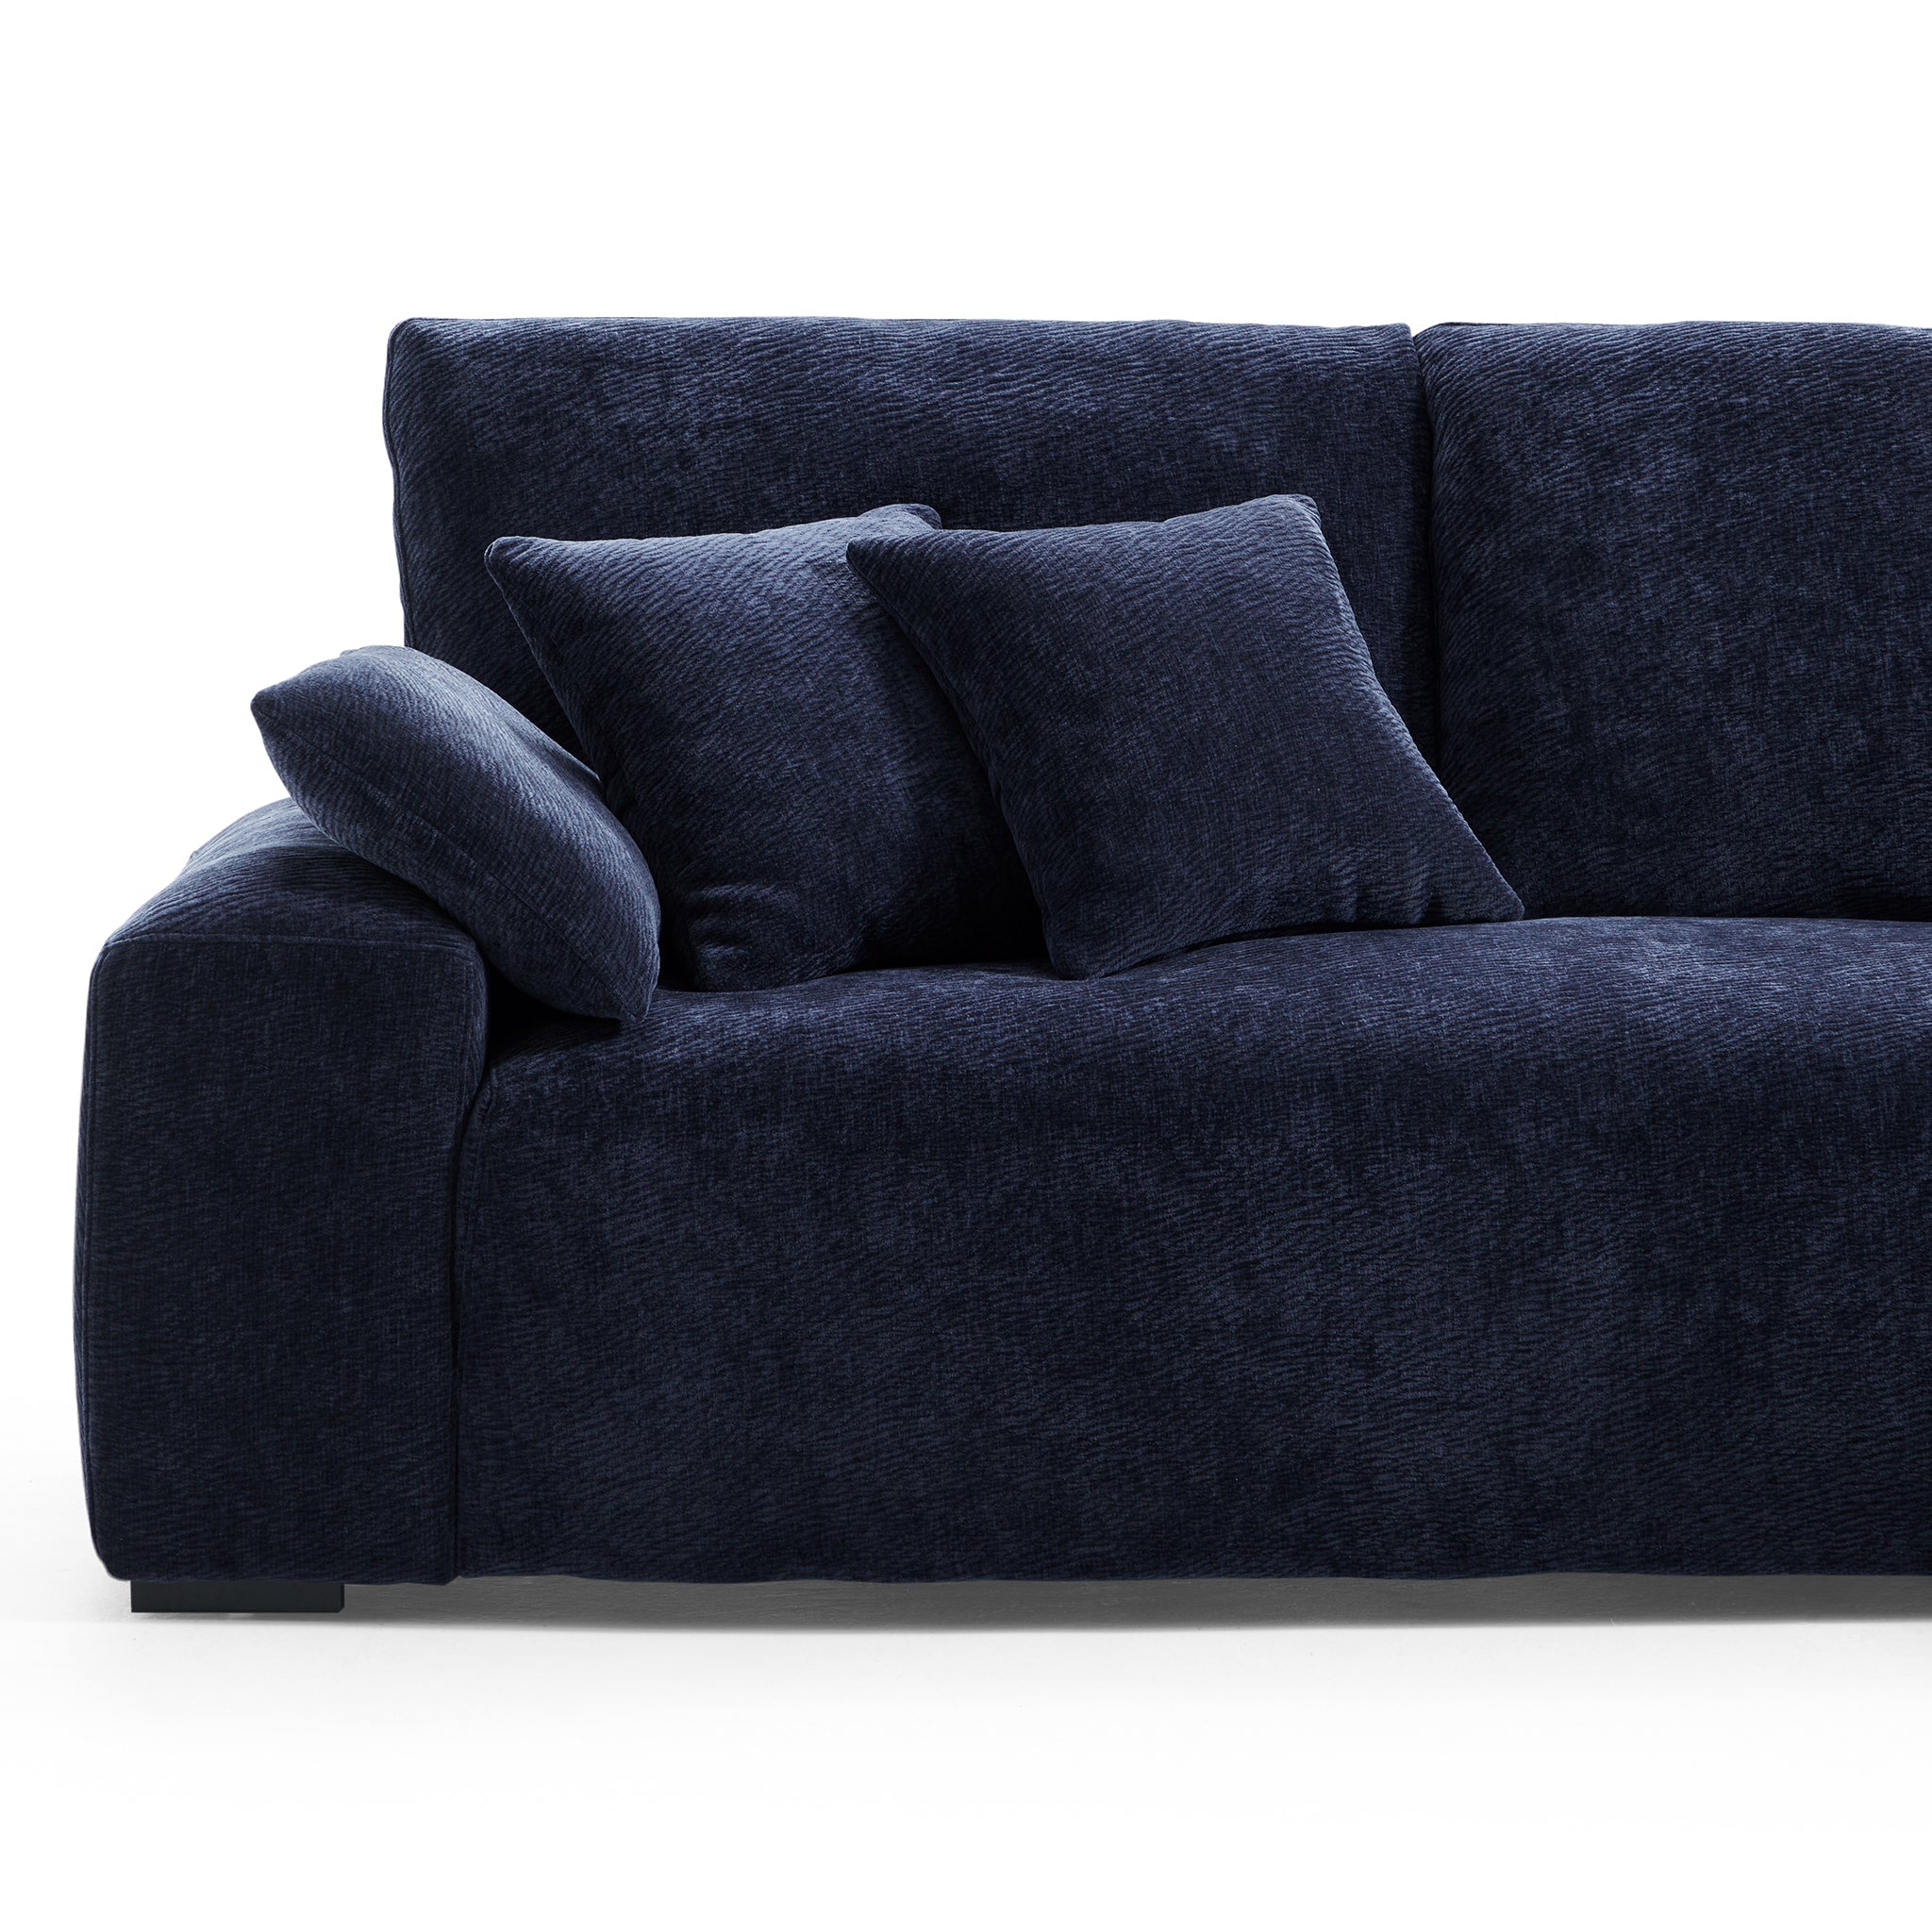 The Empress Navy Blue Sectional